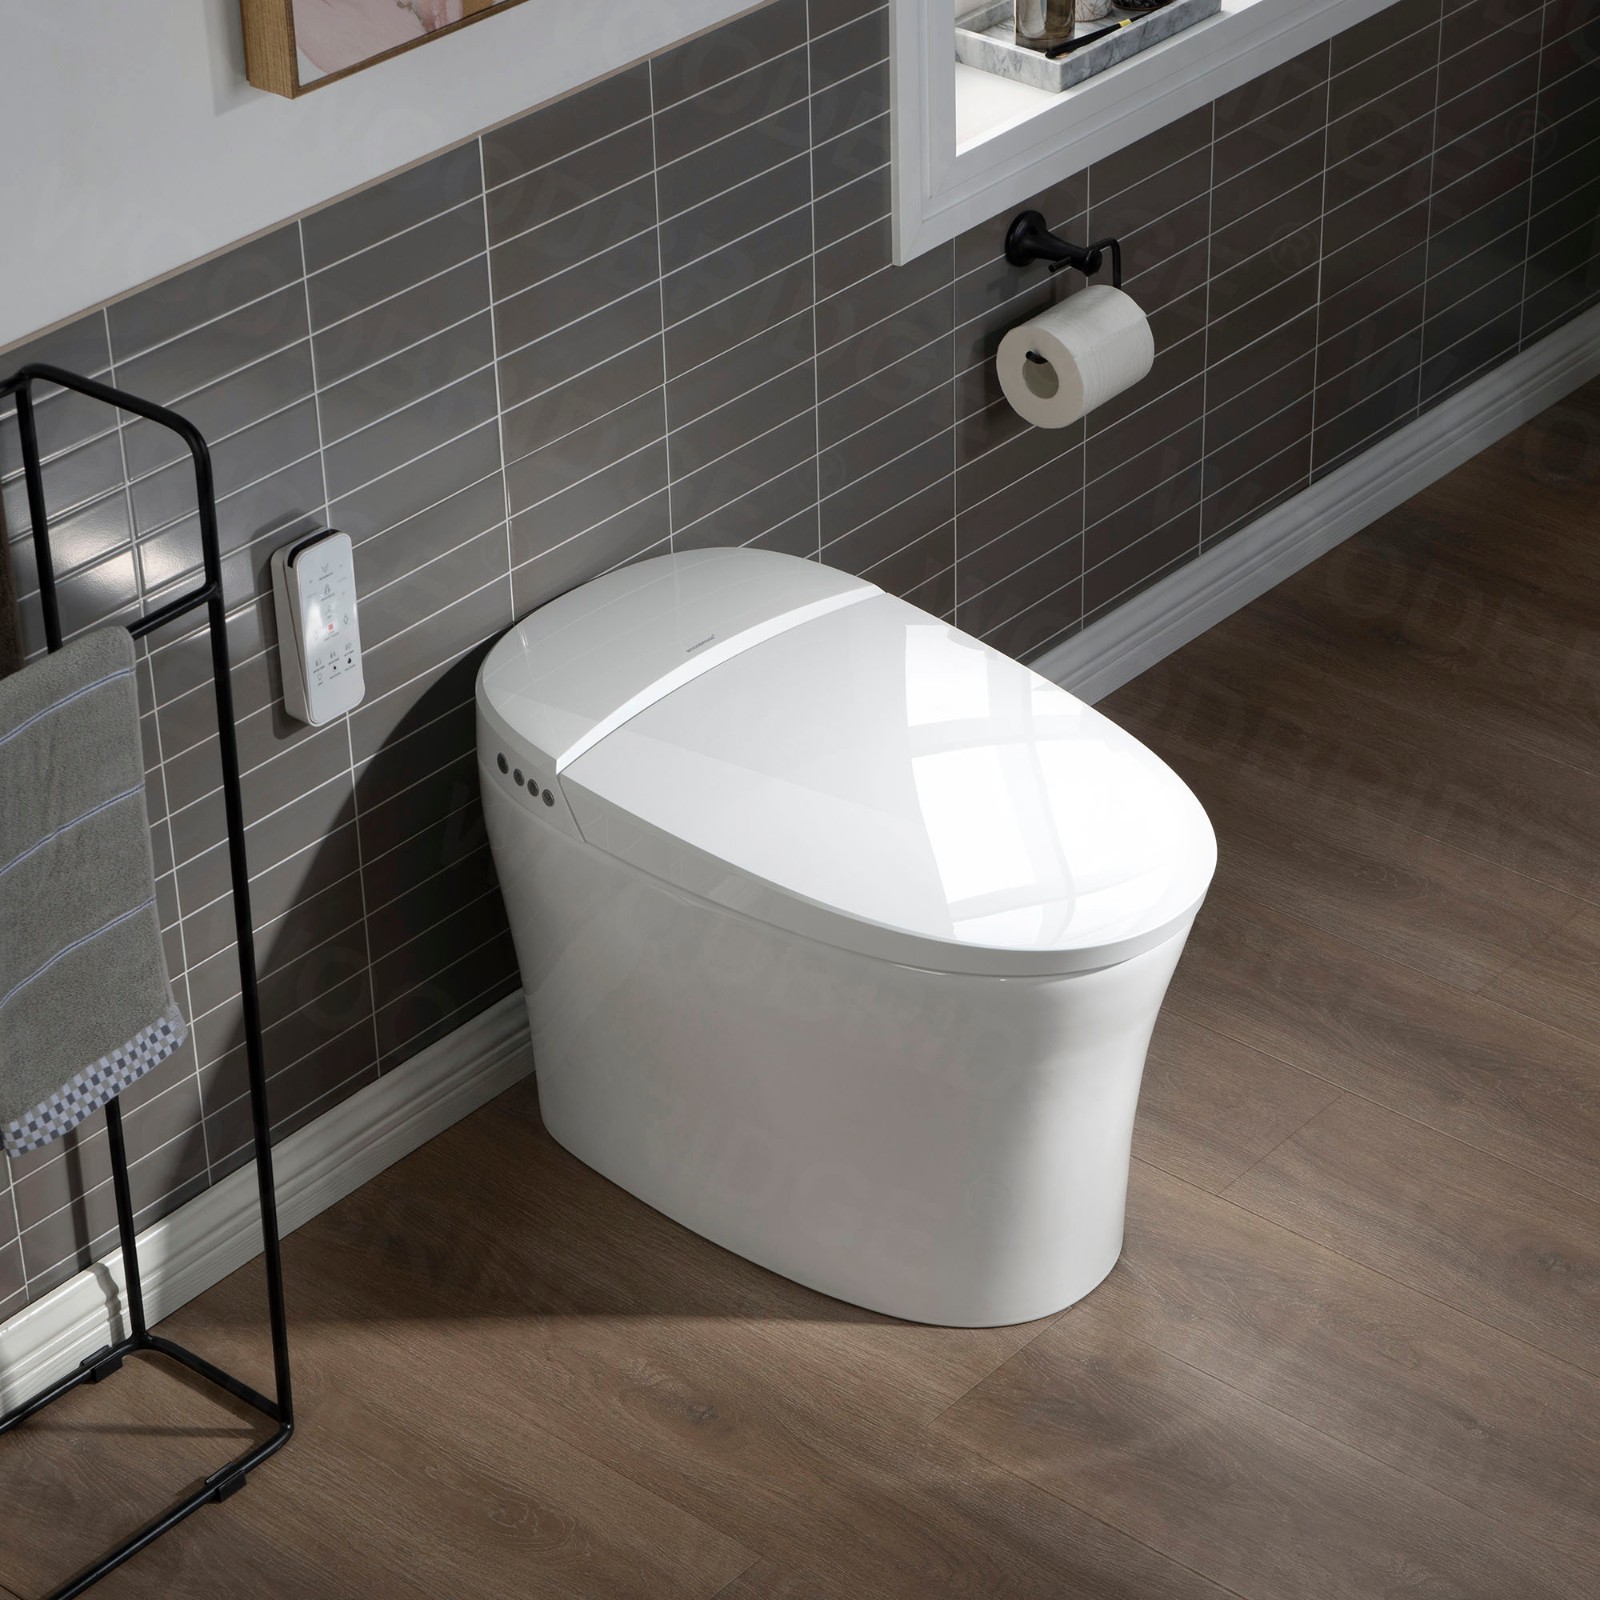  WOODBRIDGE B0970S-1.0(no foot sensor) Smart Bidet Toilet Elongated One Piece Modern Design, Heated Seat with Integrated Multi Function Remote Control, White_8441